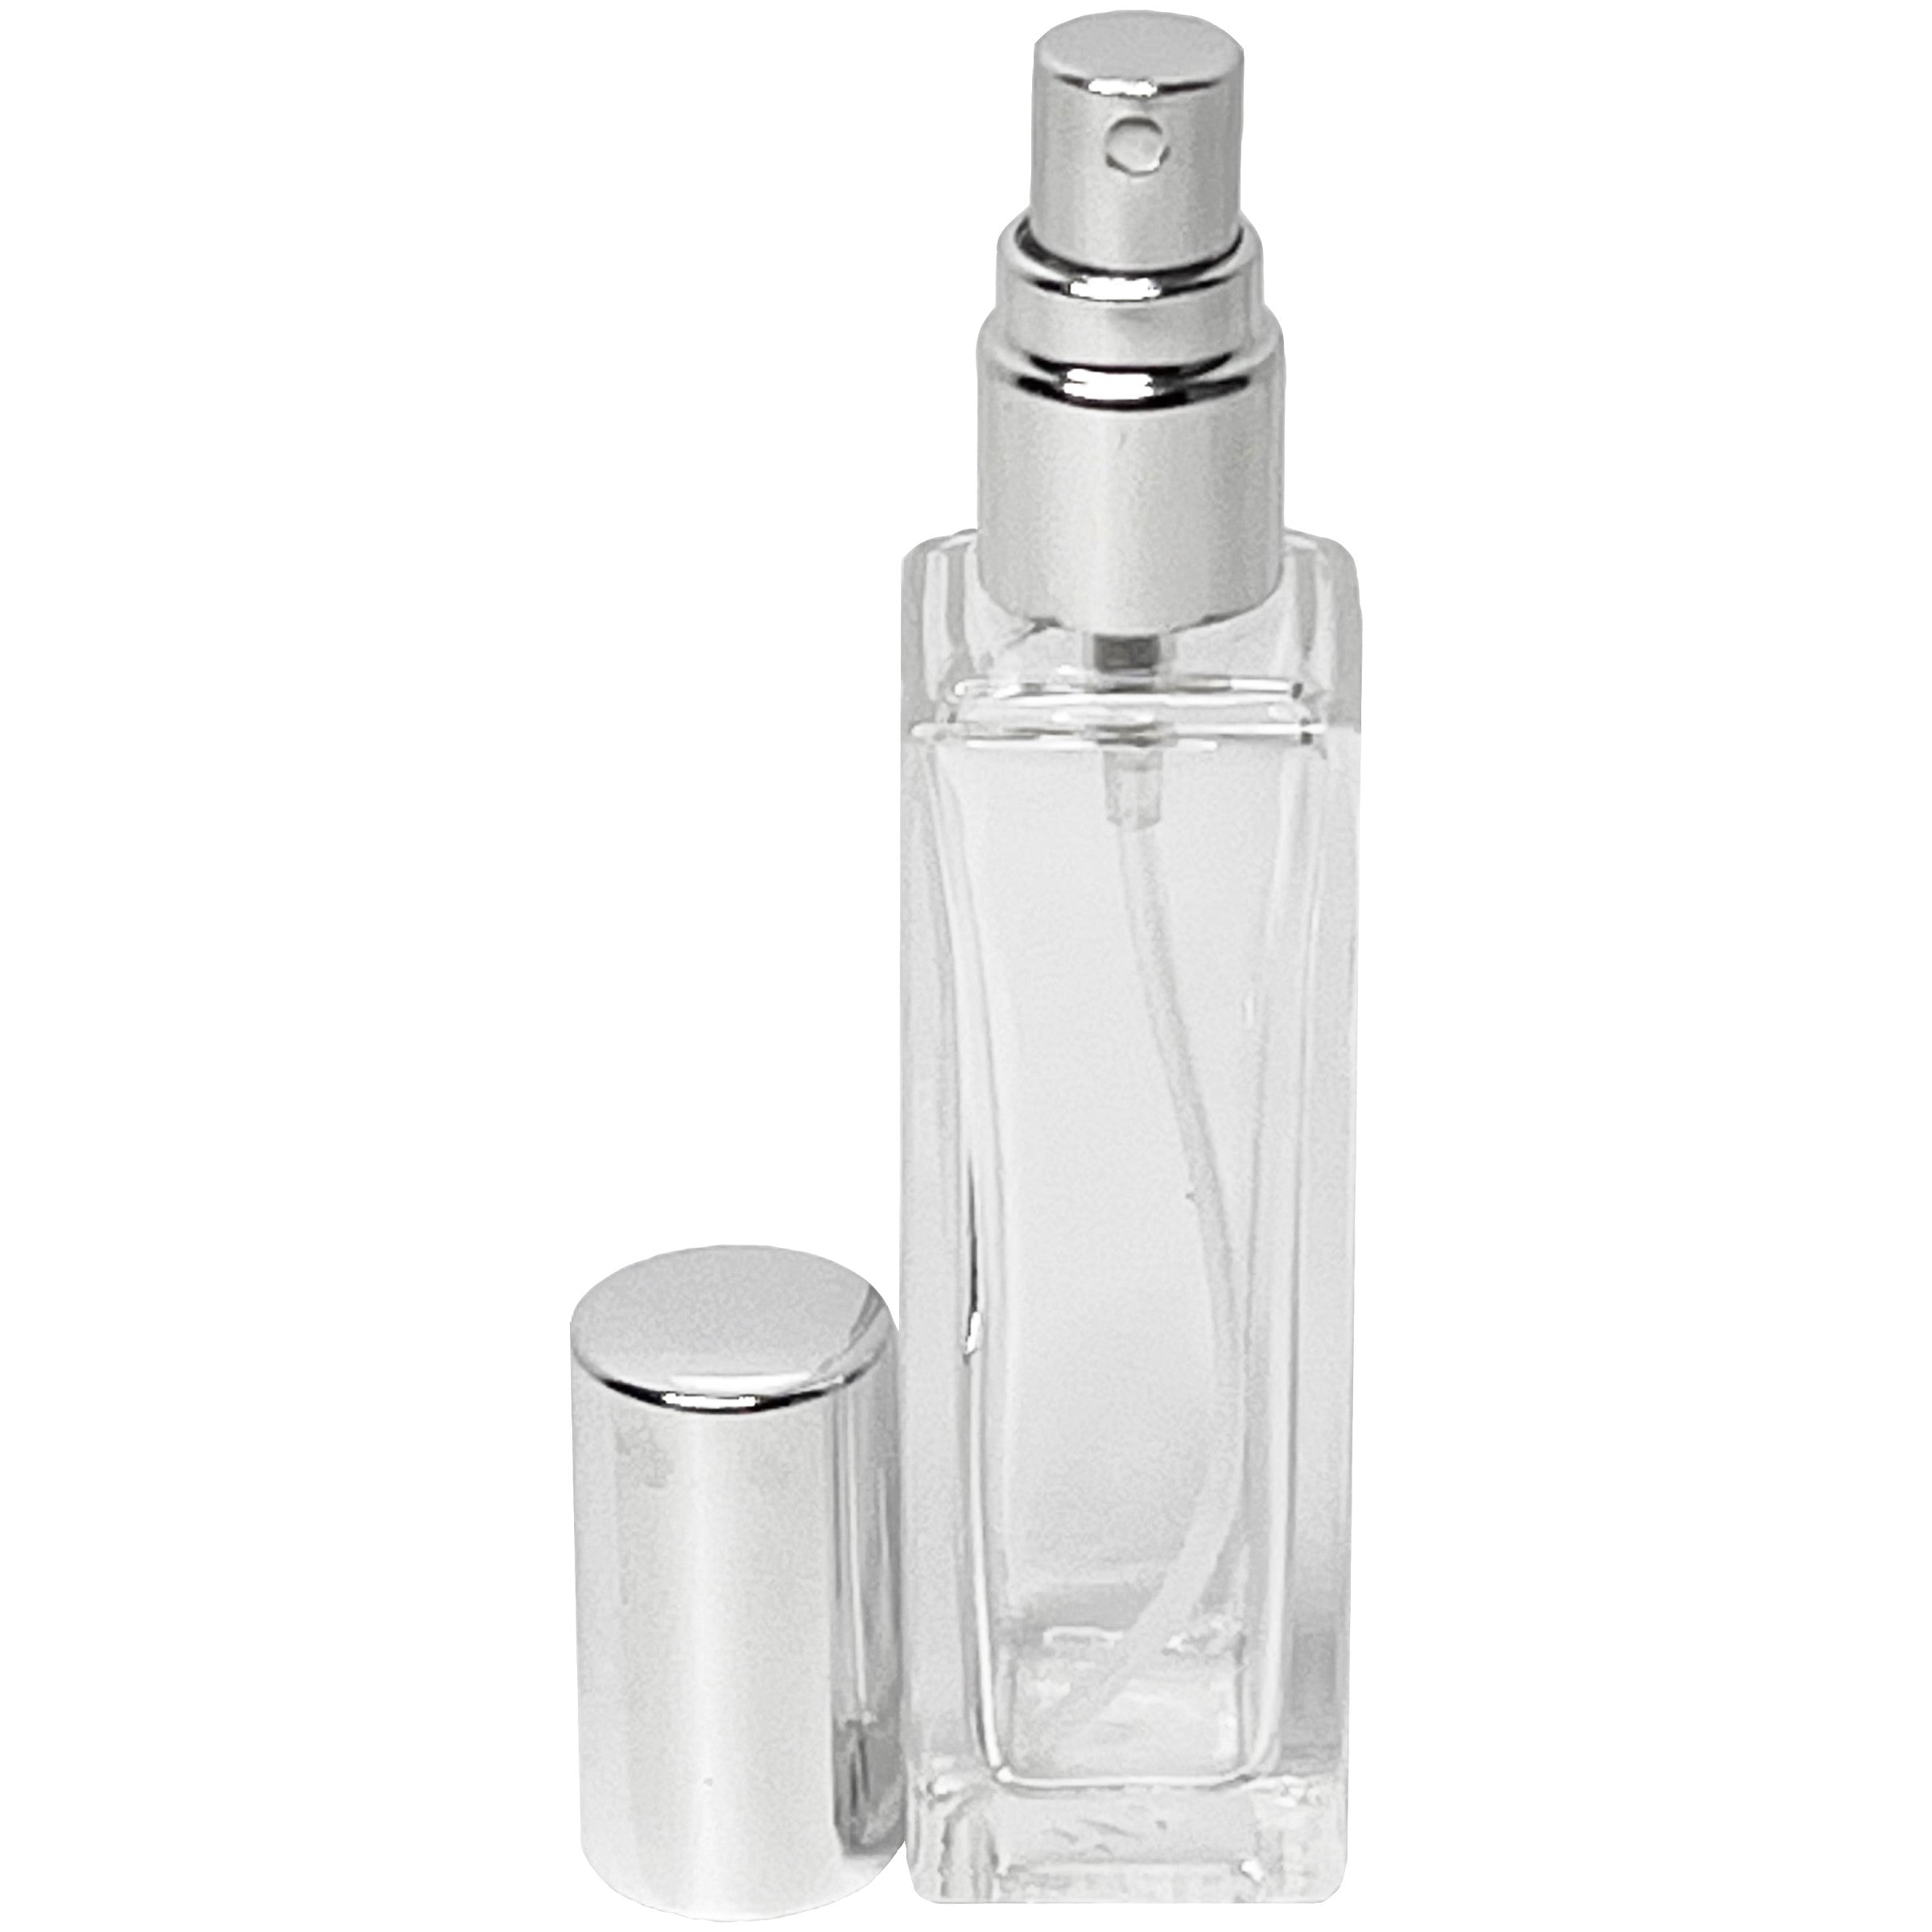 BEAUYK 100 ml (3.4 oz) Large Clear Thick Glass Empty Bottle, Gold/Silver  Spray Perfume Bottle Atomiz…See more BEAUYK 100 ml (3.4 oz) Large Clear  Thick